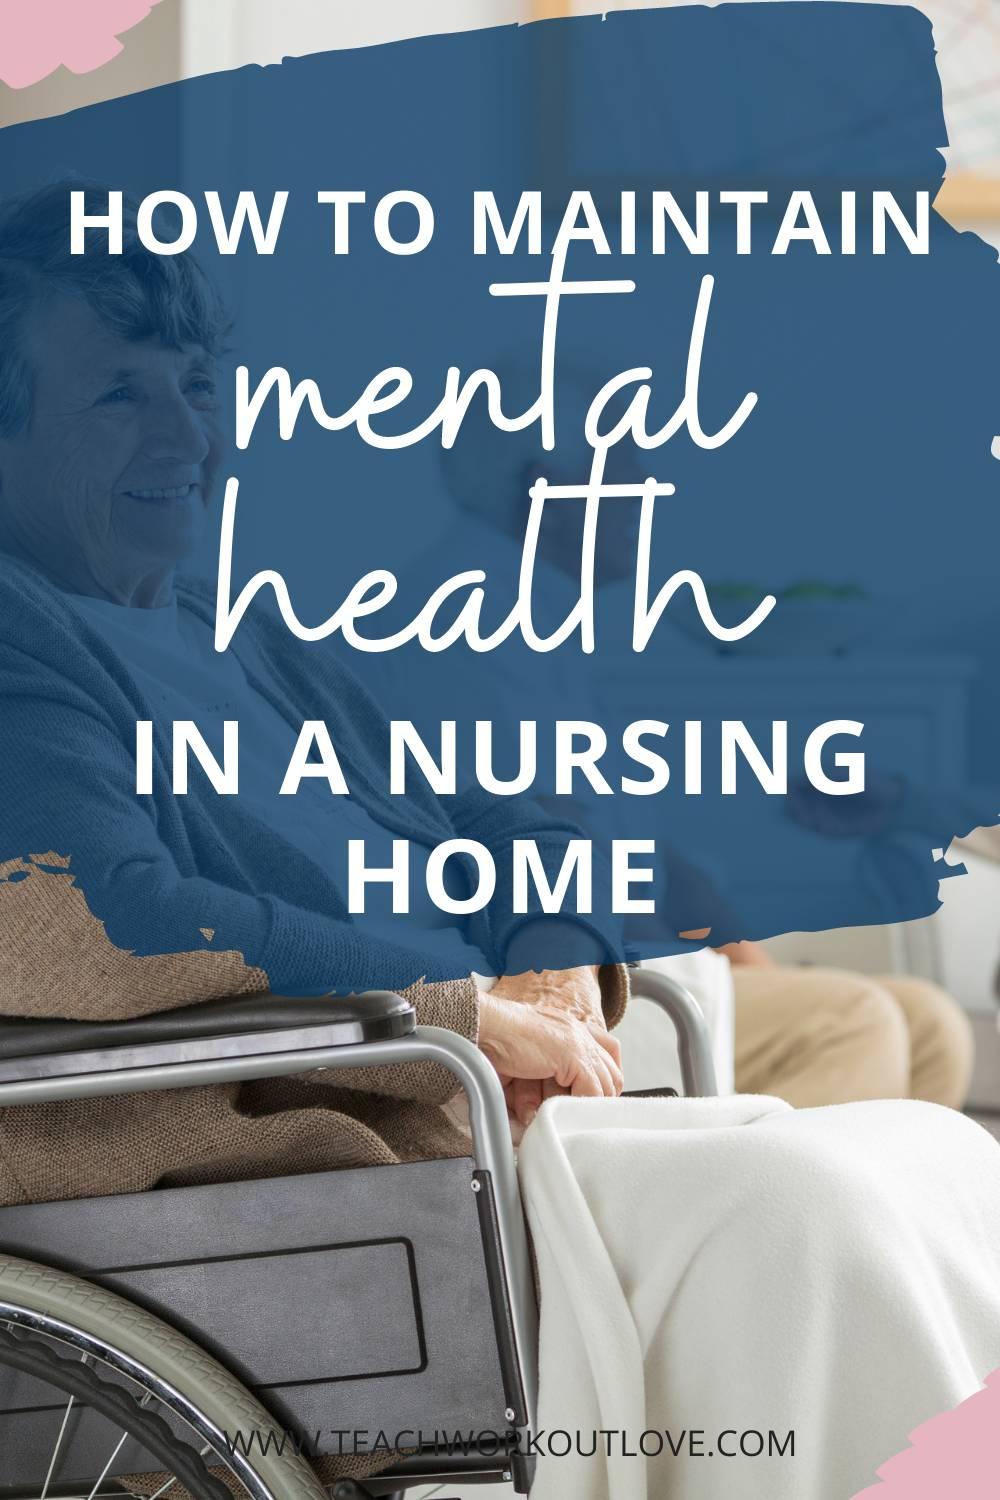 This blog post will discuss the importance of mental health in an elderly population, with special attention given to maintaining good mental health in a nursing home setting.